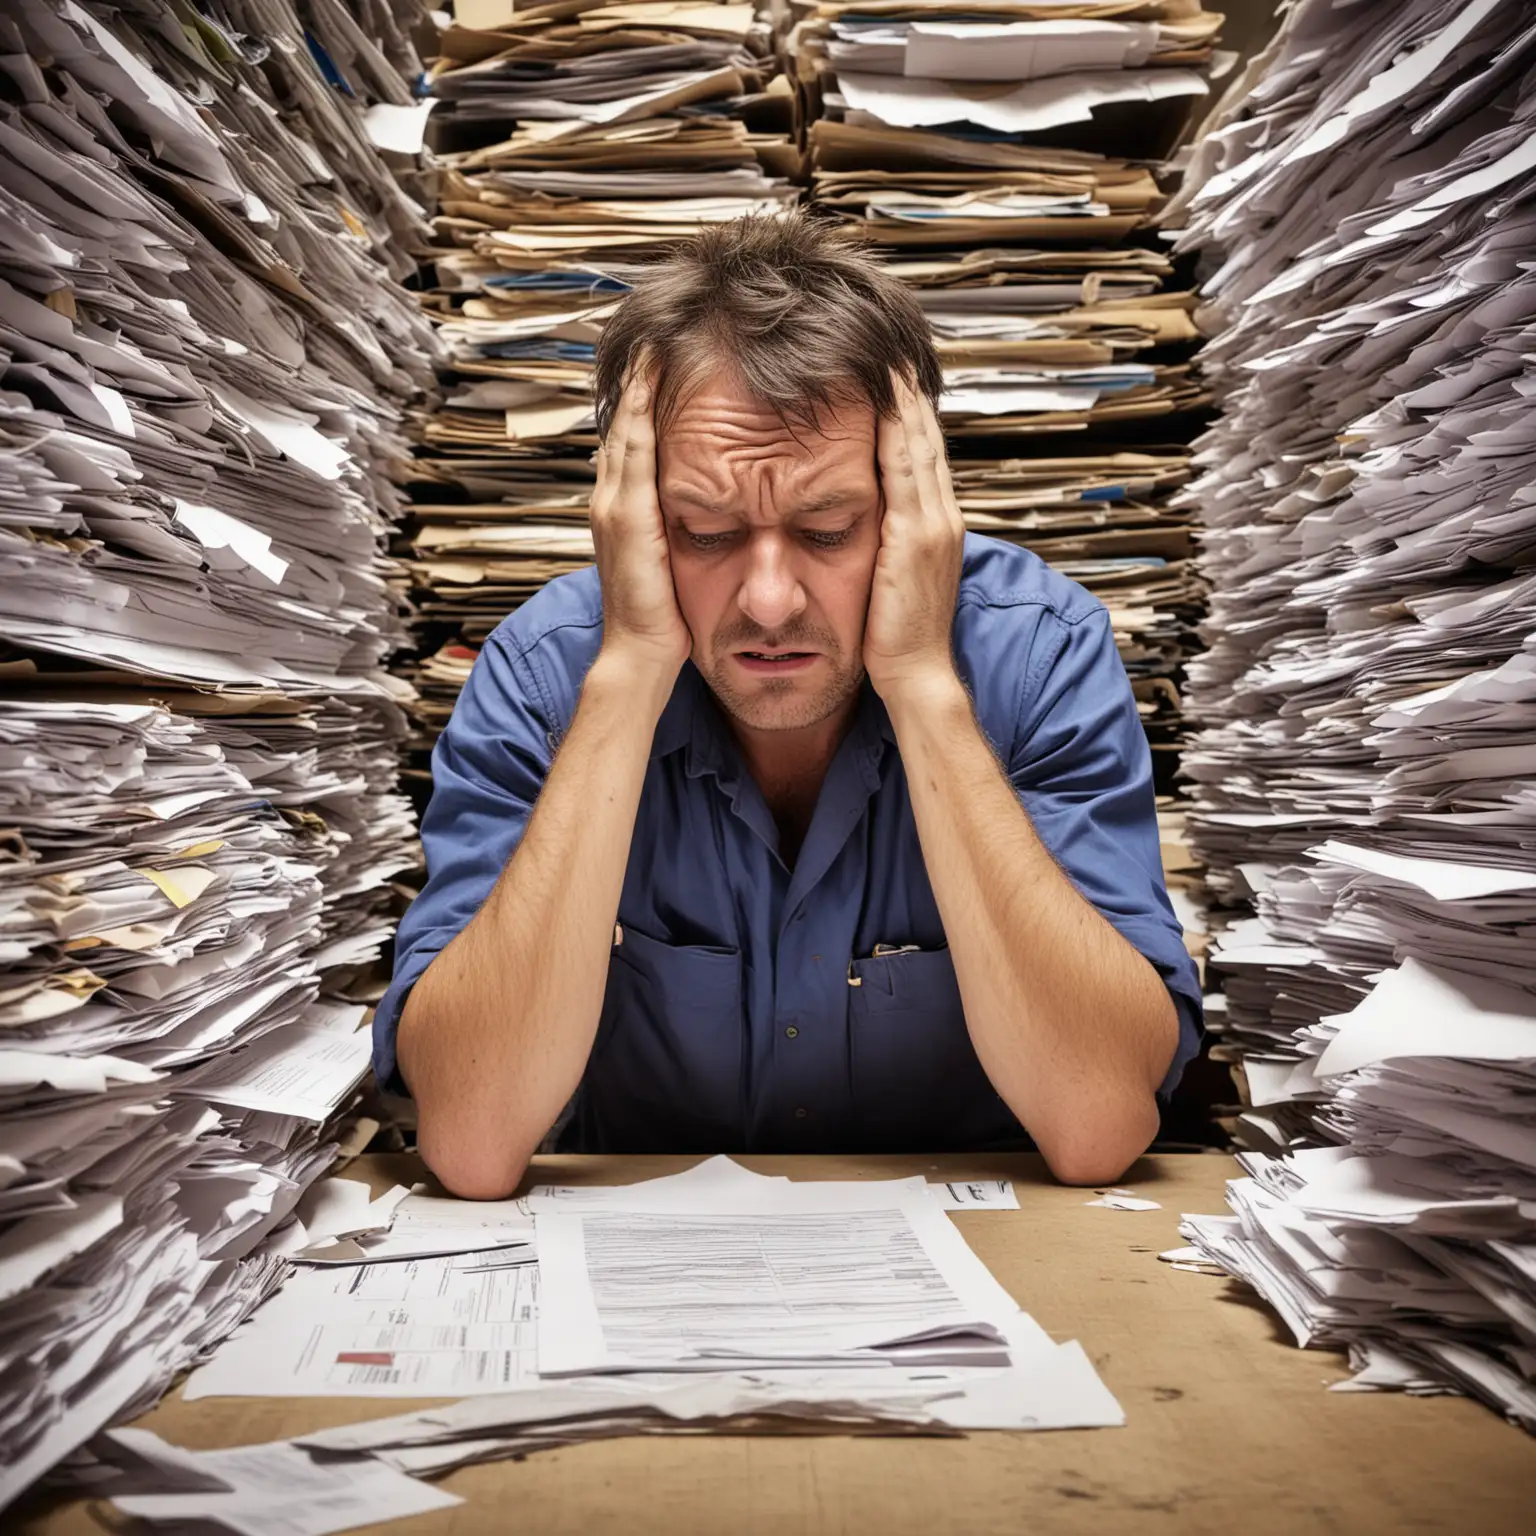 create a picture of  a stressed out over worked tradie who is buried in paperwork.